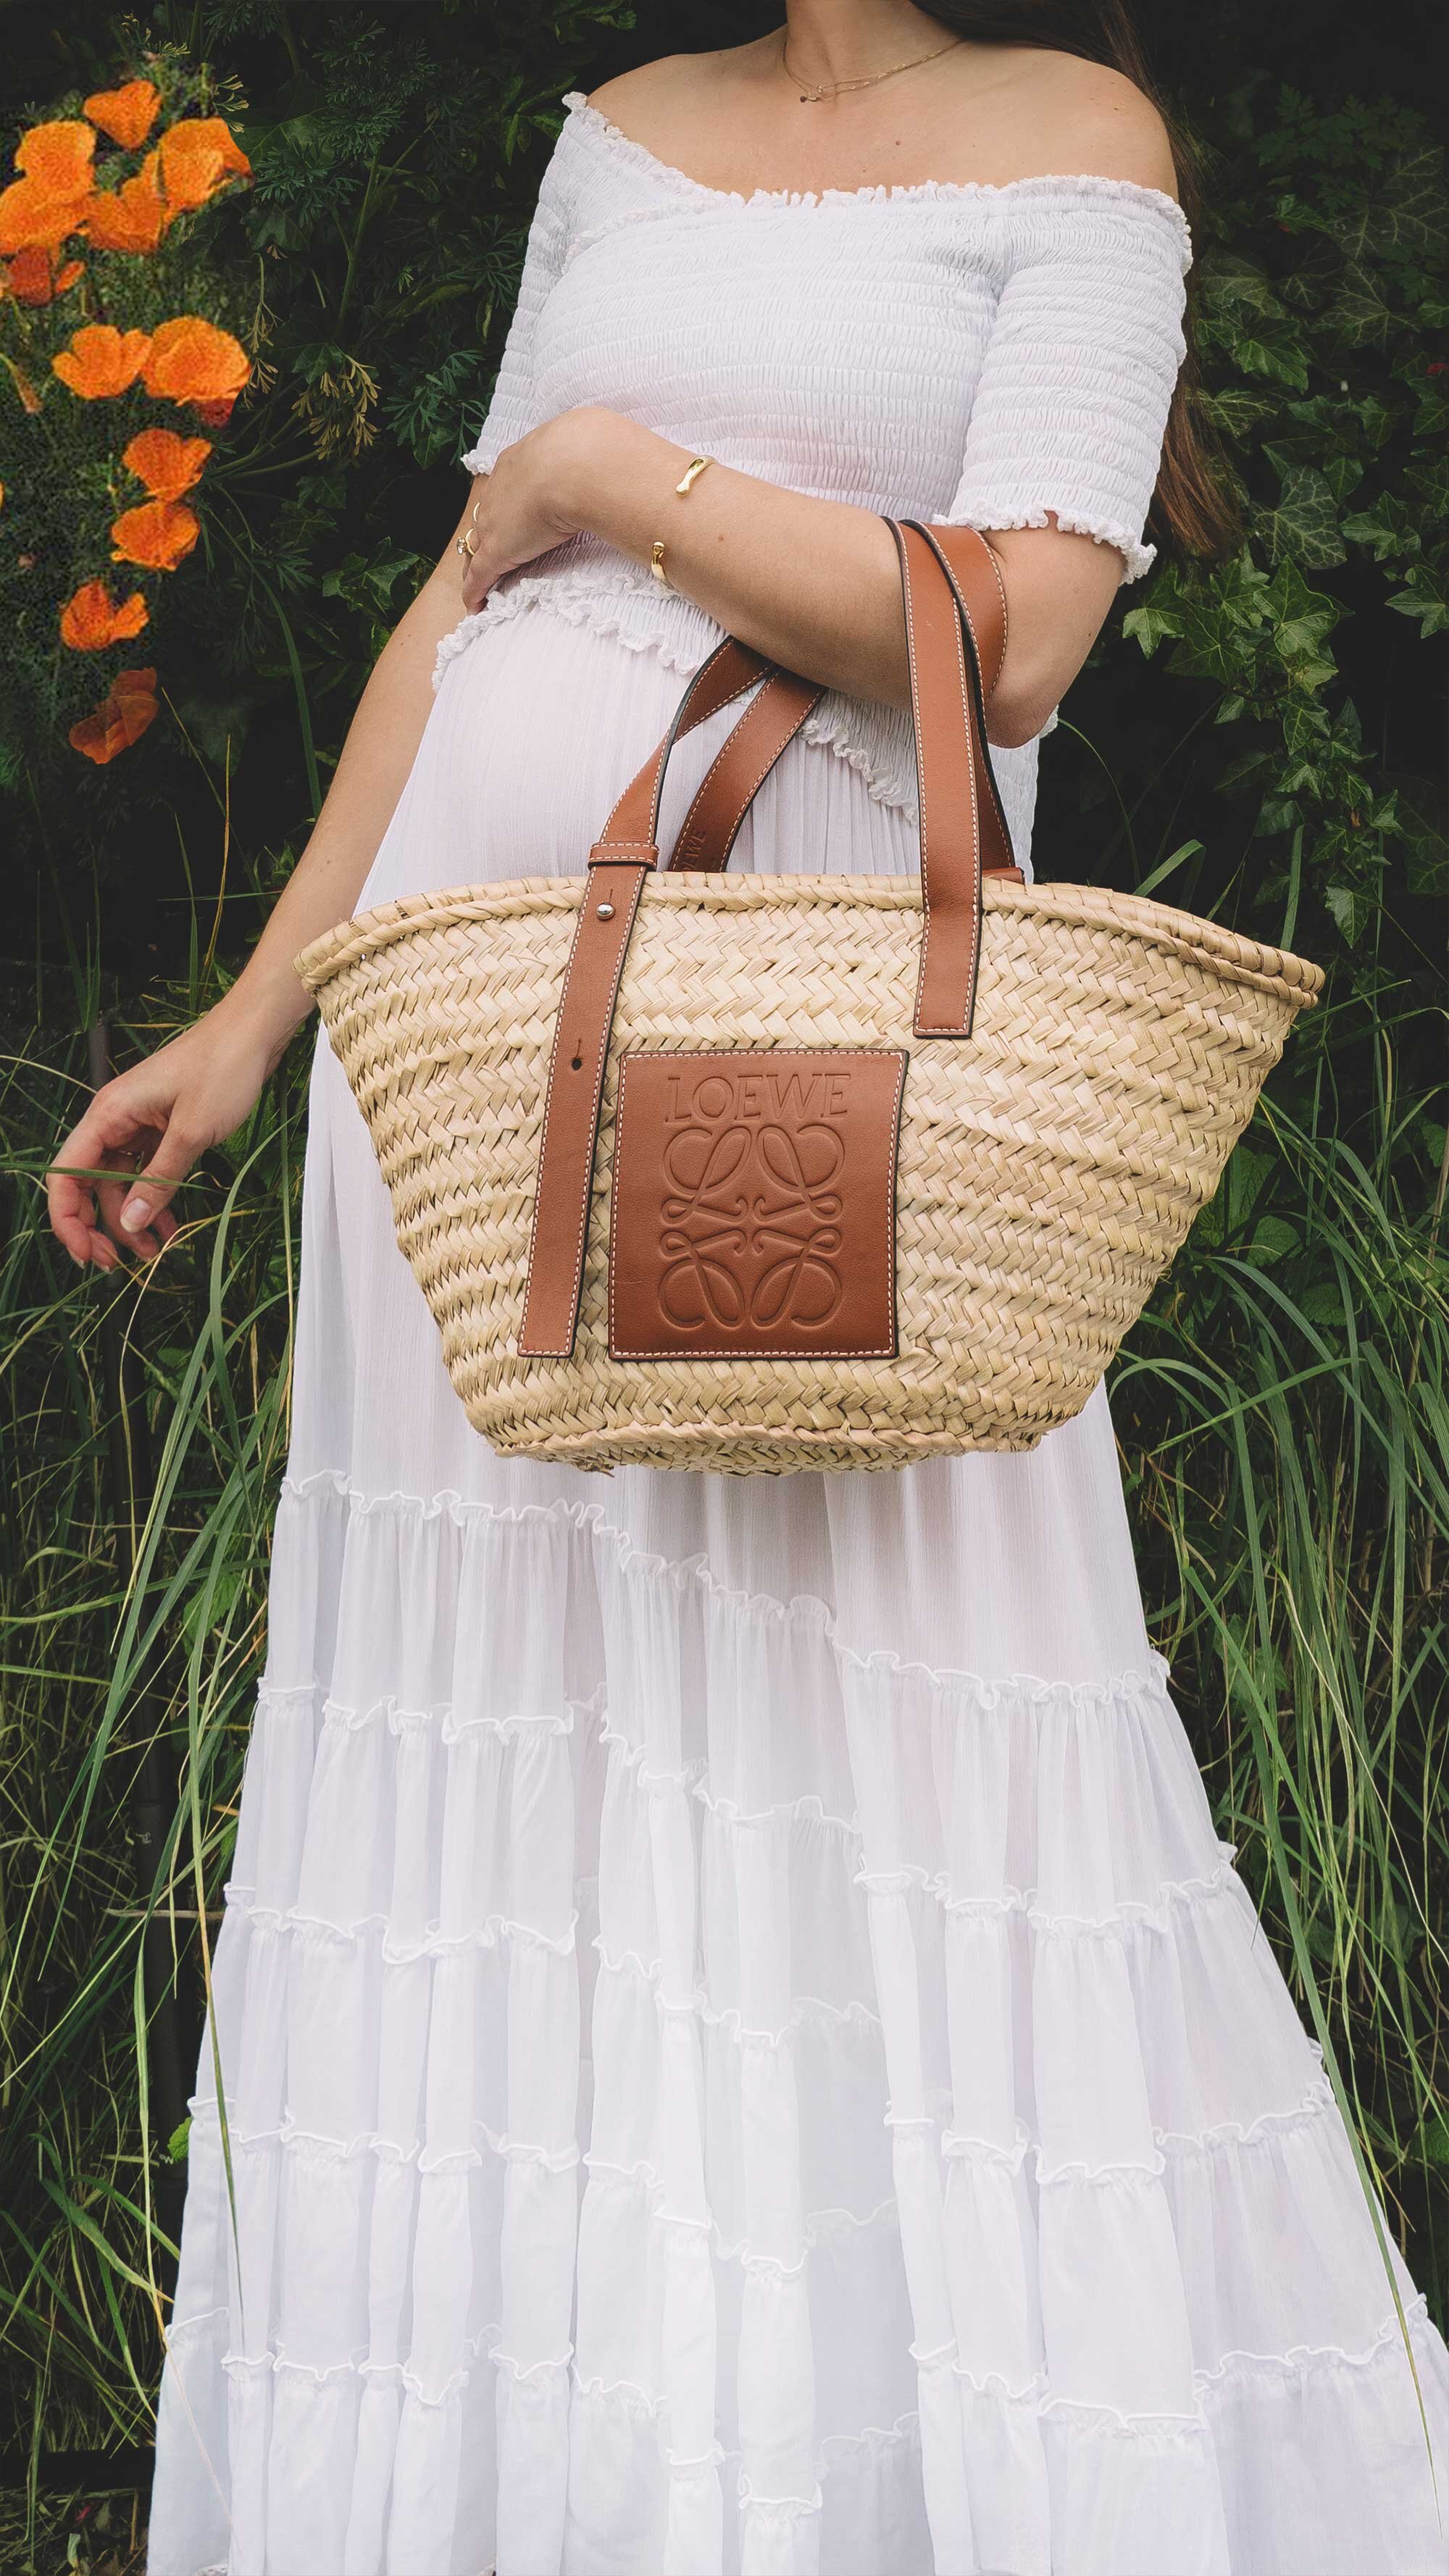 Cute cottage style summer dress. Sarah Butler of @sarahchristine wearing Poupette St Barth Soledad Off-shoulder White Midi Dress and Loewe Leather-Trimmed Woven Basket Bag in countryside field of Seattle, Washington -5.jpg